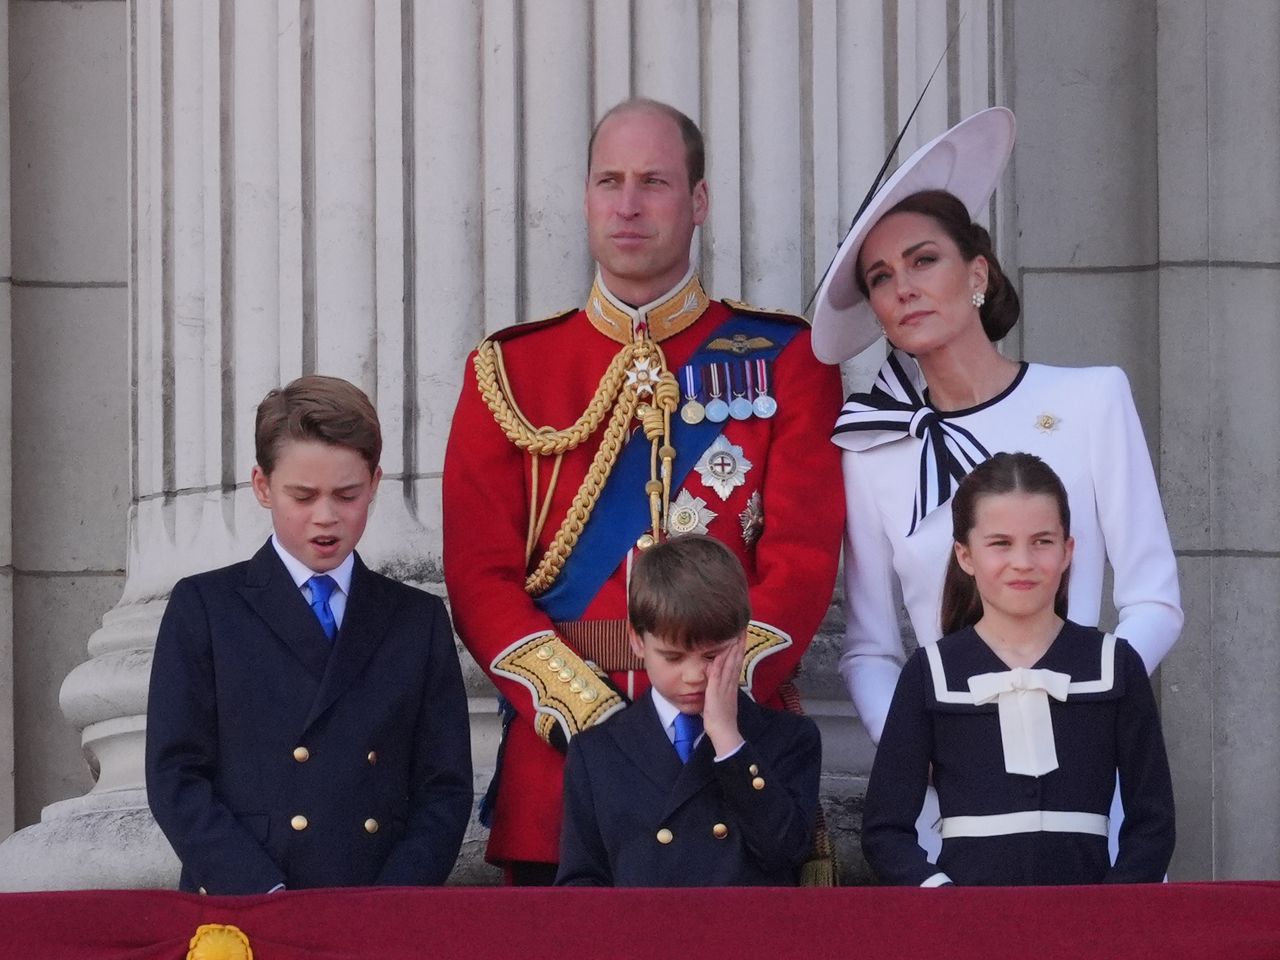 Prince Louis with his siblings and parents